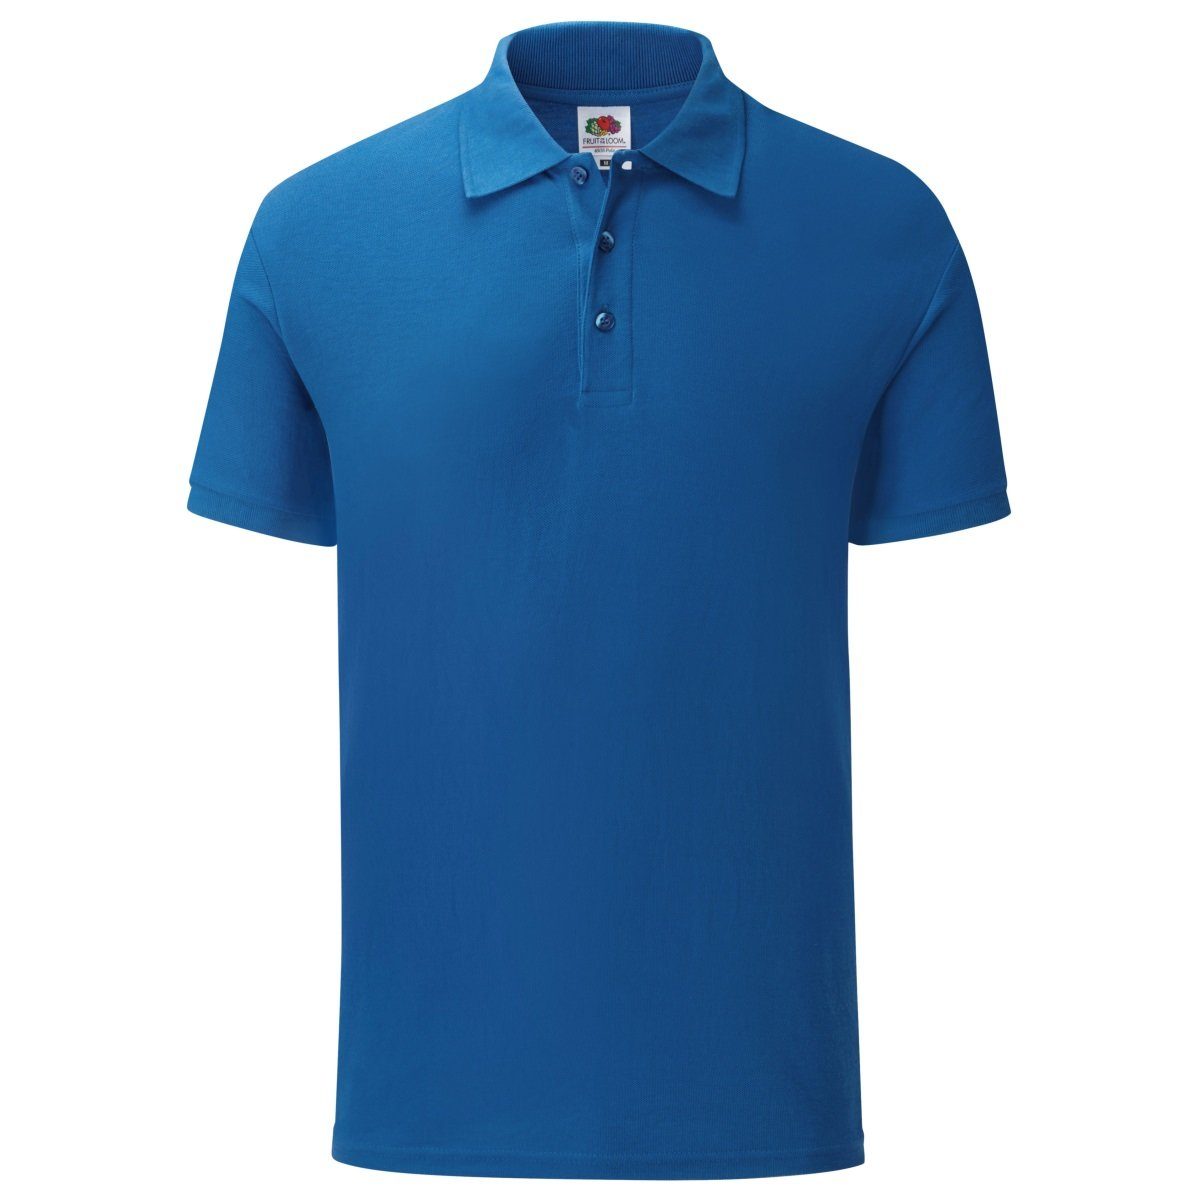 Fruit of the Loom Poloshirt Fruit of the Loom 65/35 Tailored Fit royal